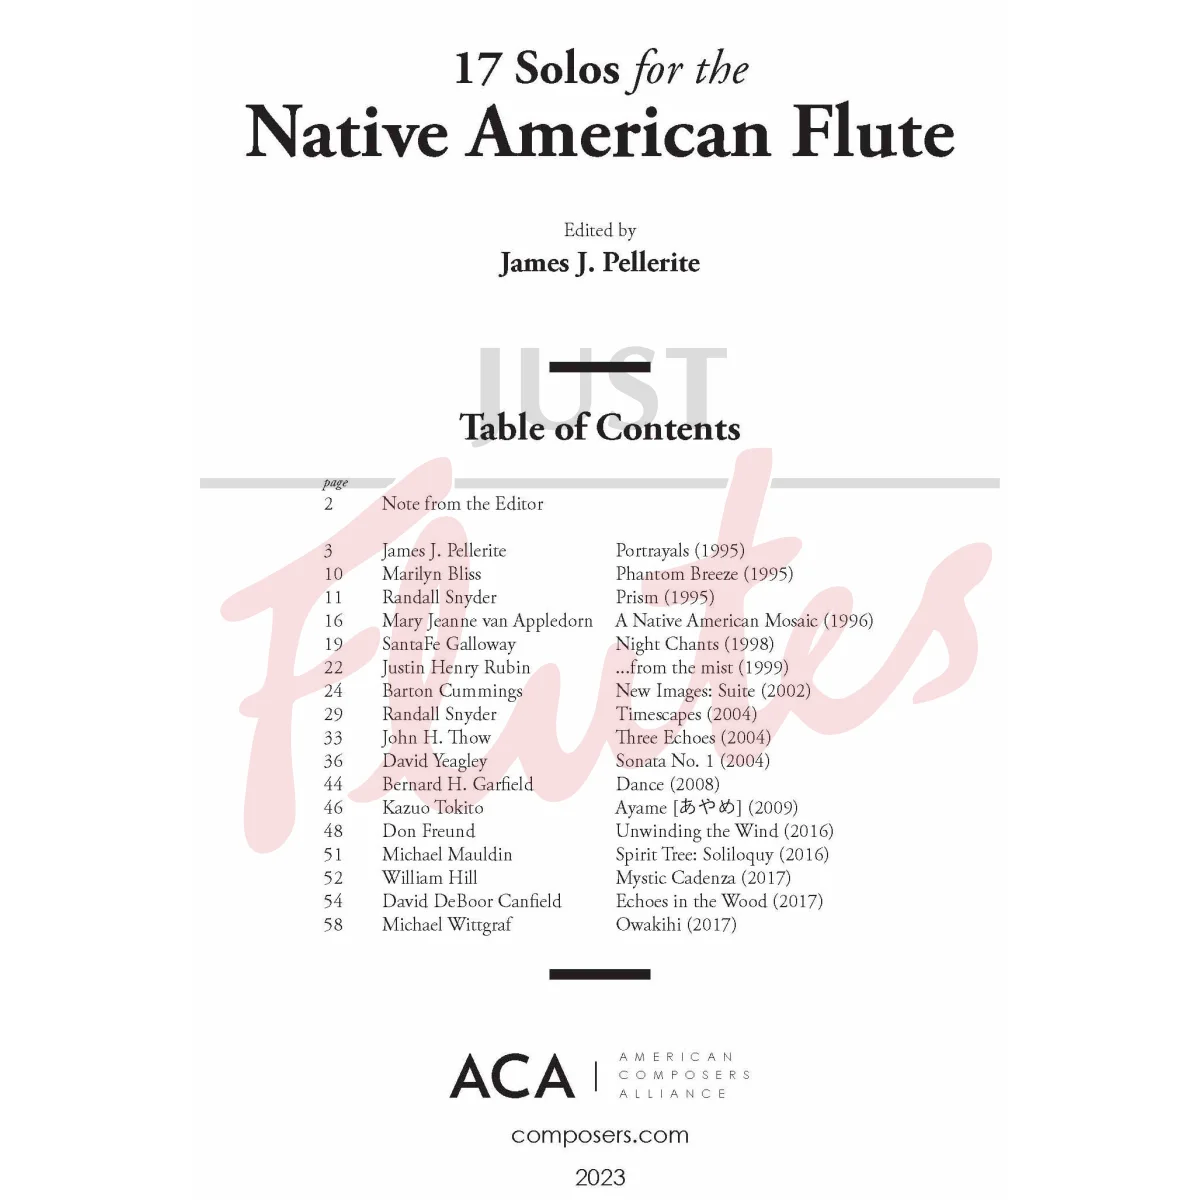 17 Solos for the Native American Flute